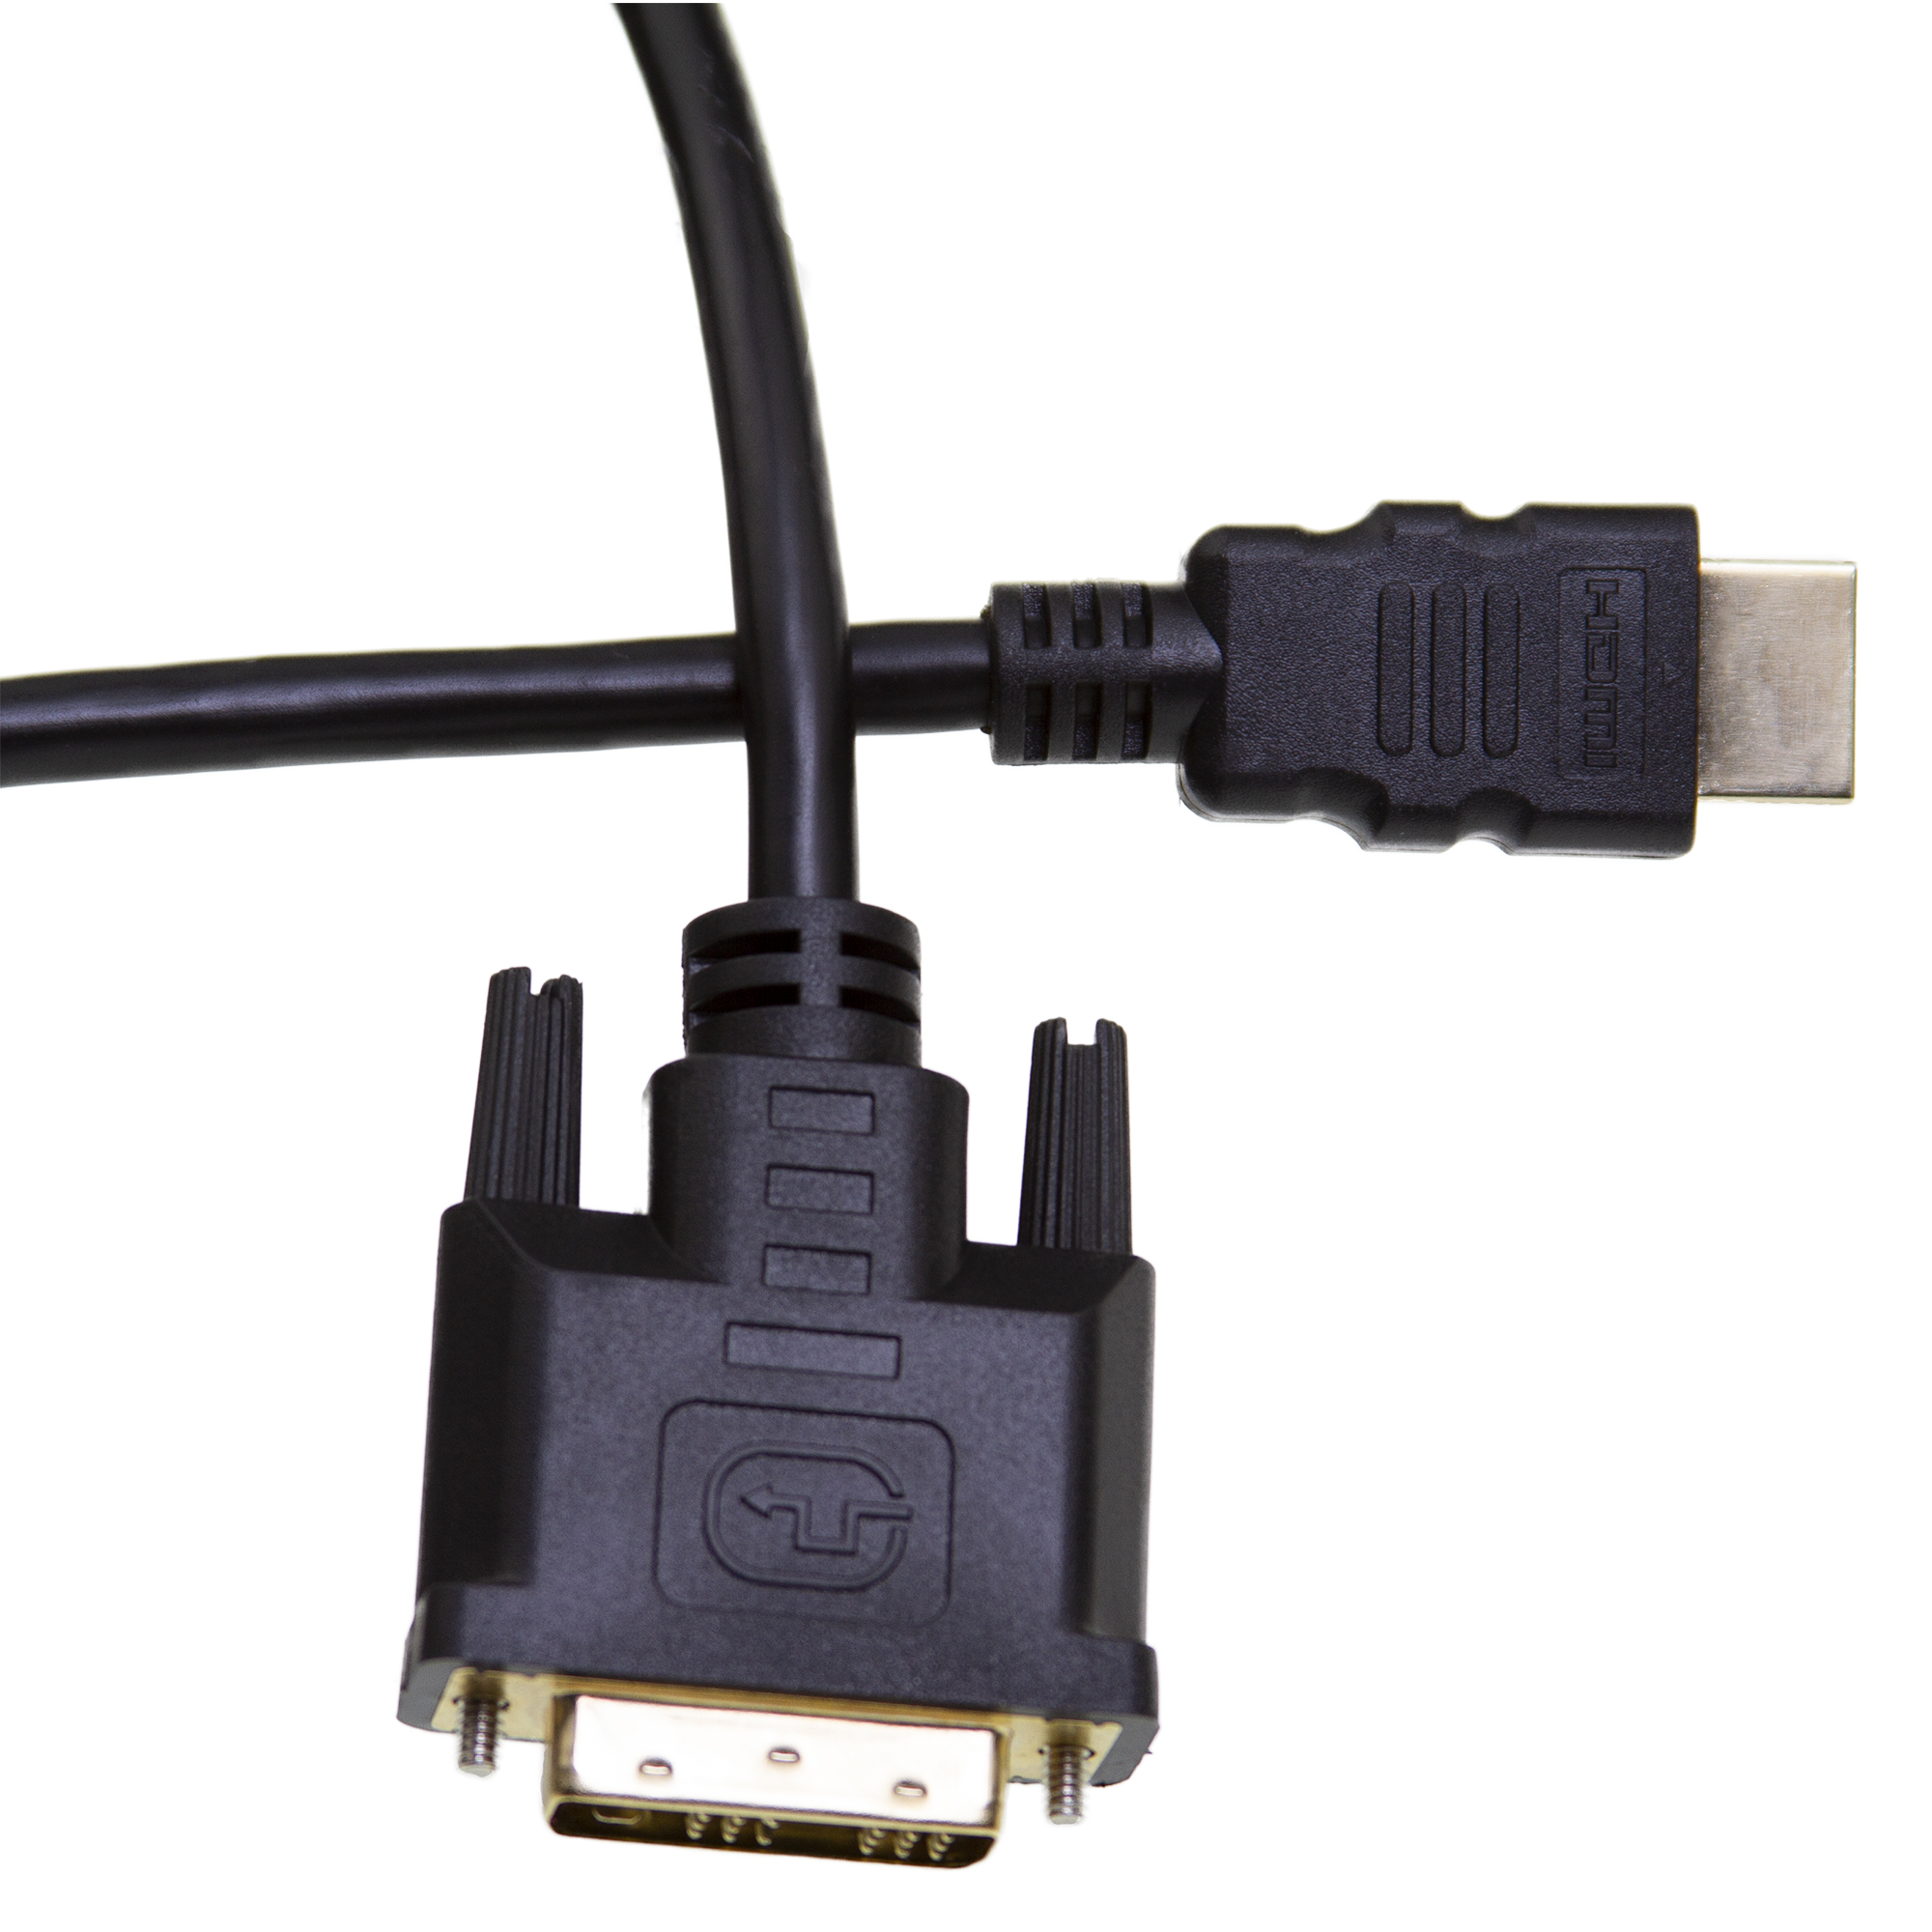 DVI-D Male to HDMI Male Cable Gold Digital HDTV - 50 Feet